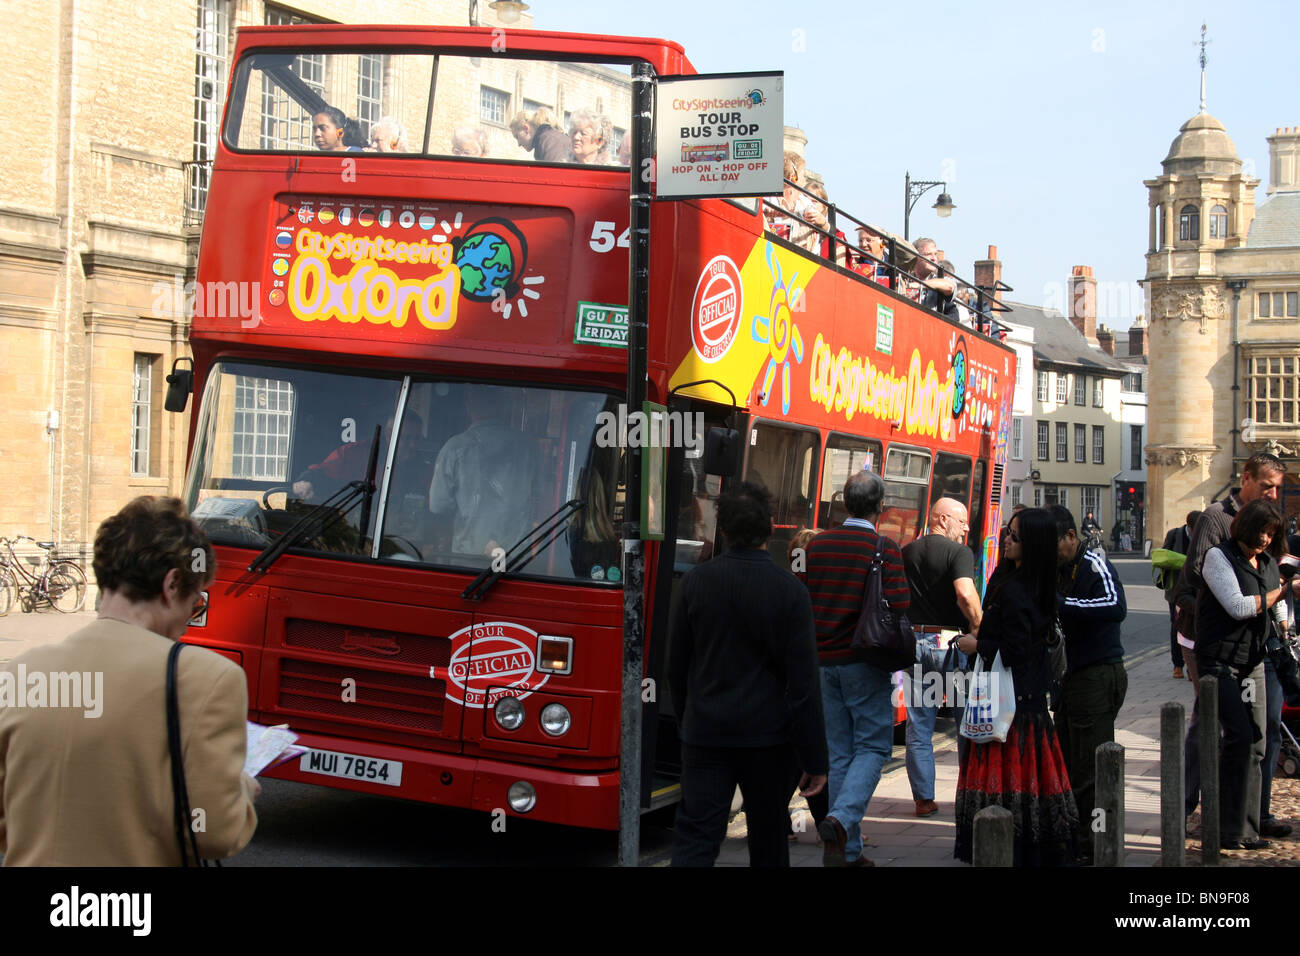 City Sightseeing Oxford Stock Photo